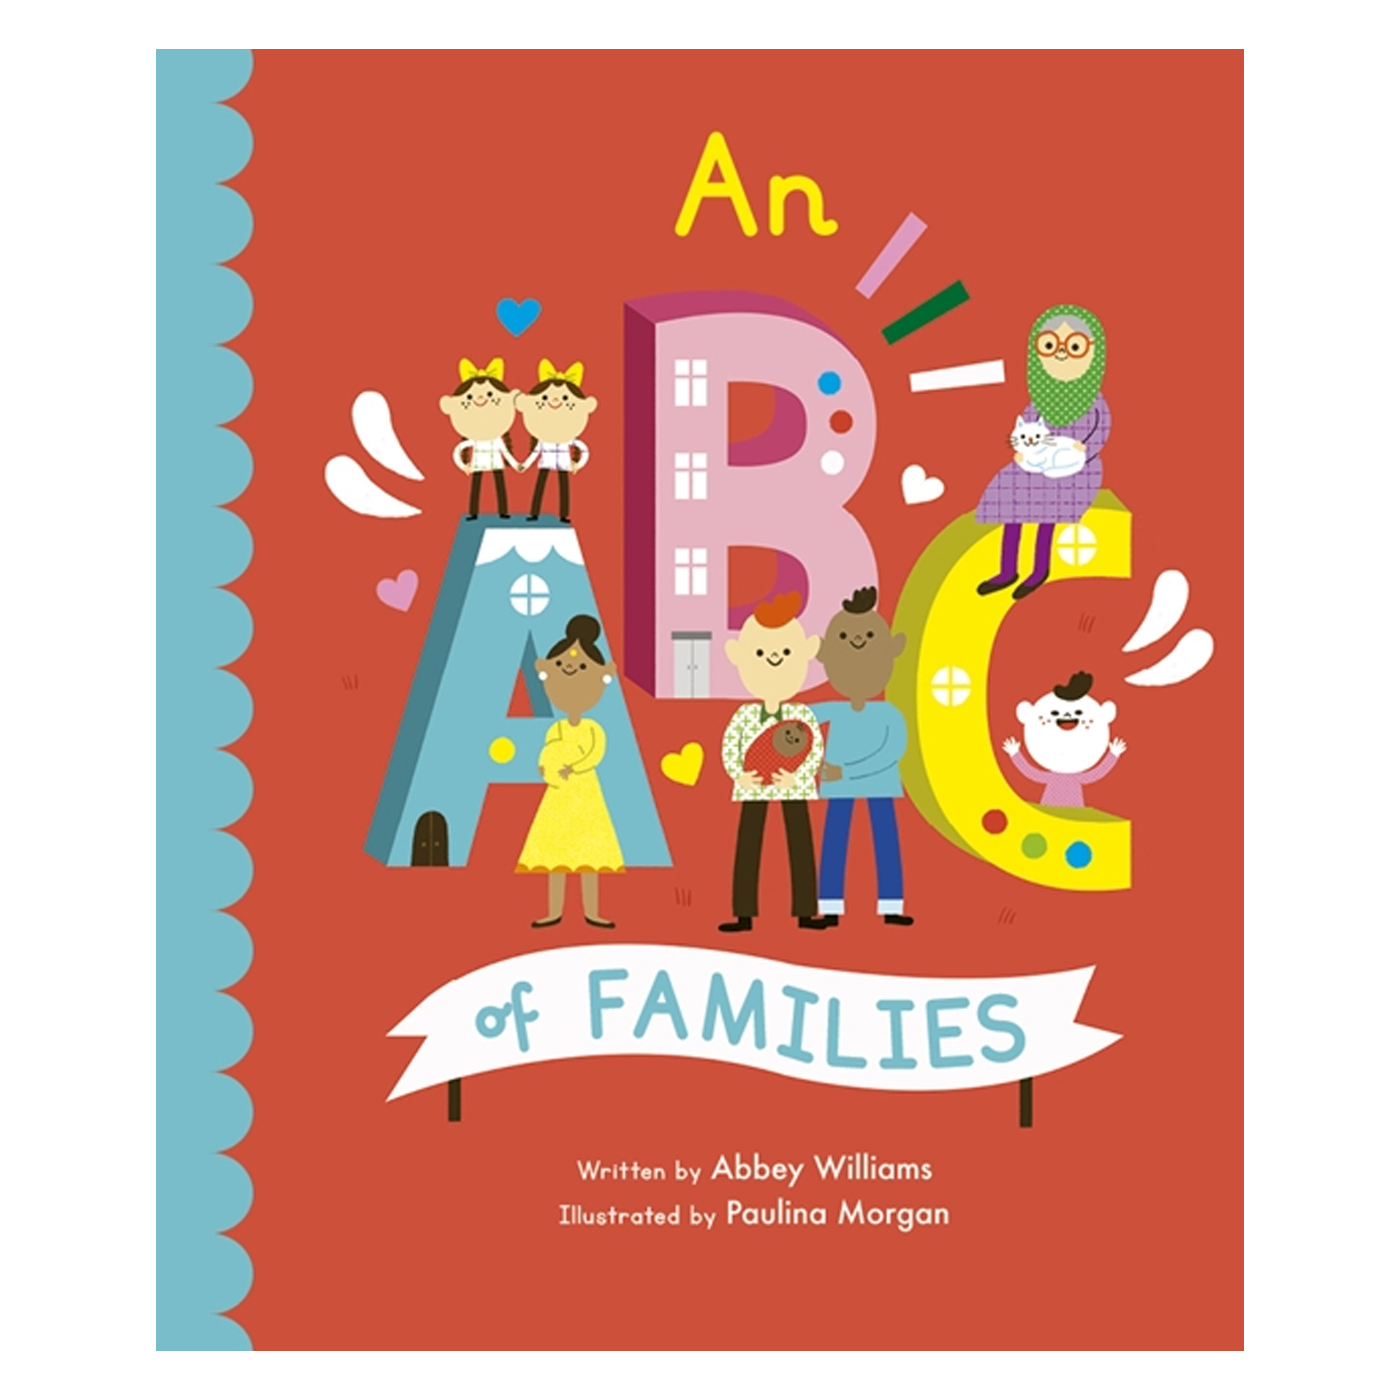  An ABC of Families